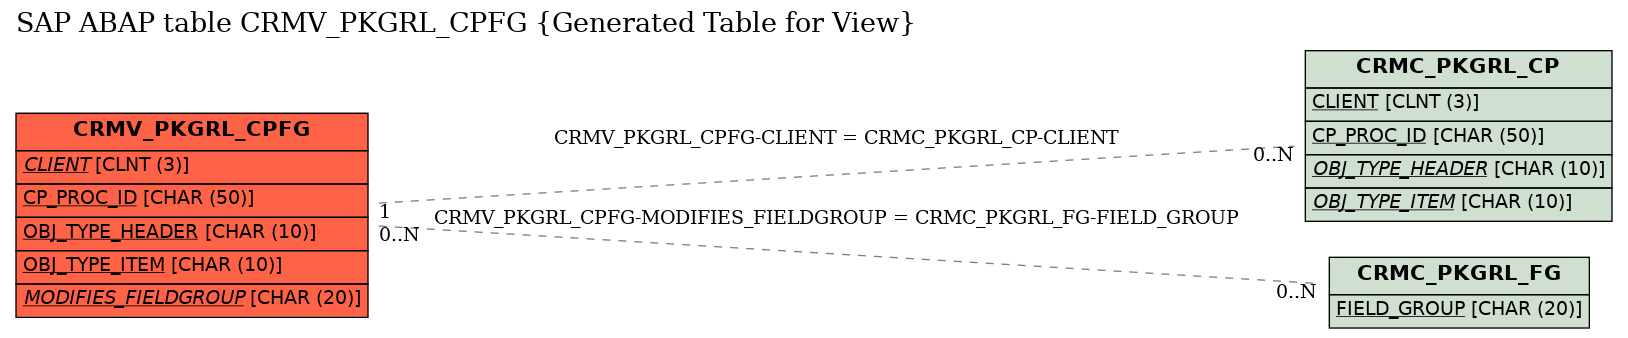 E-R Diagram for table CRMV_PKGRL_CPFG (Generated Table for View)